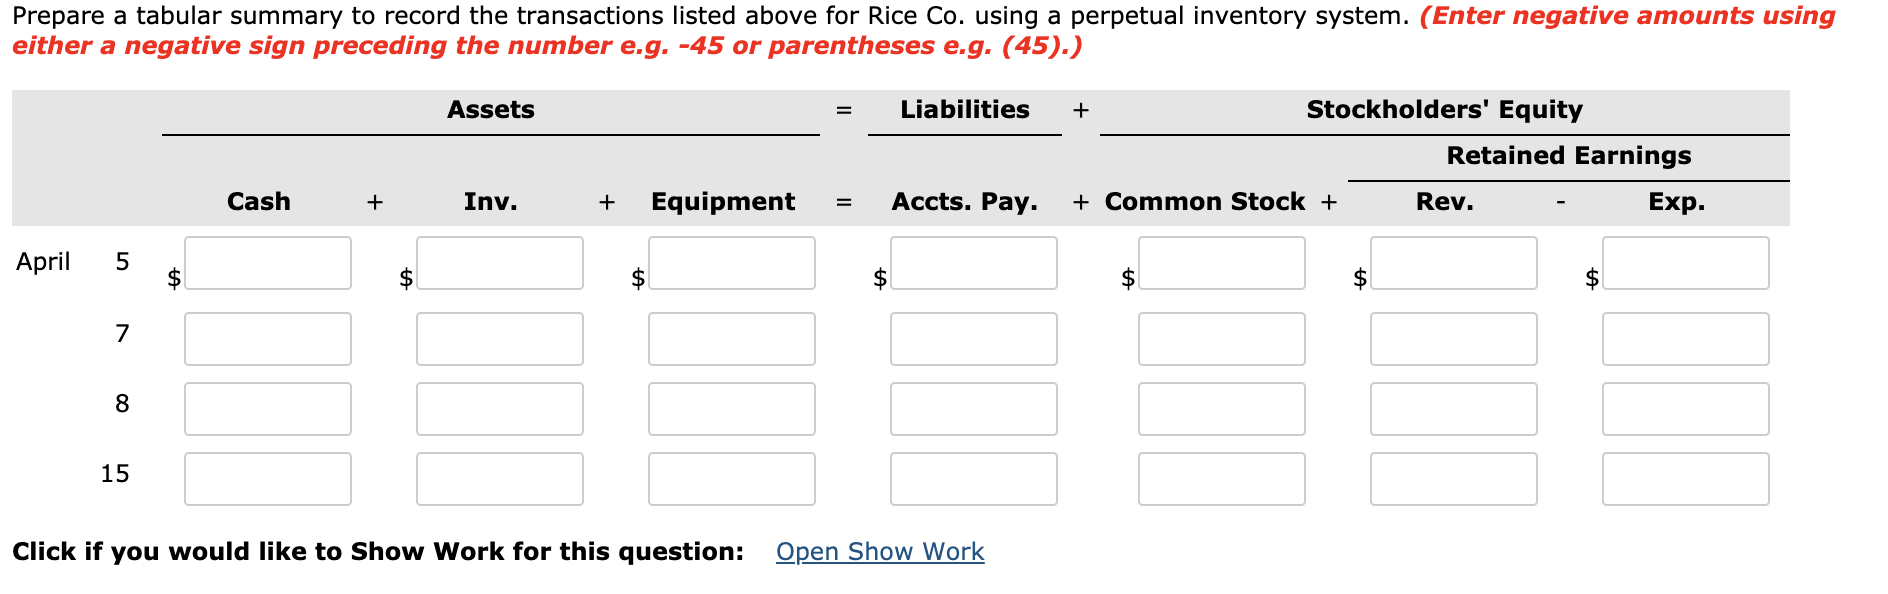 Prepare a tabular summary to record the transactions listed above for rice co. using a perpetual inventory system. (enter neg